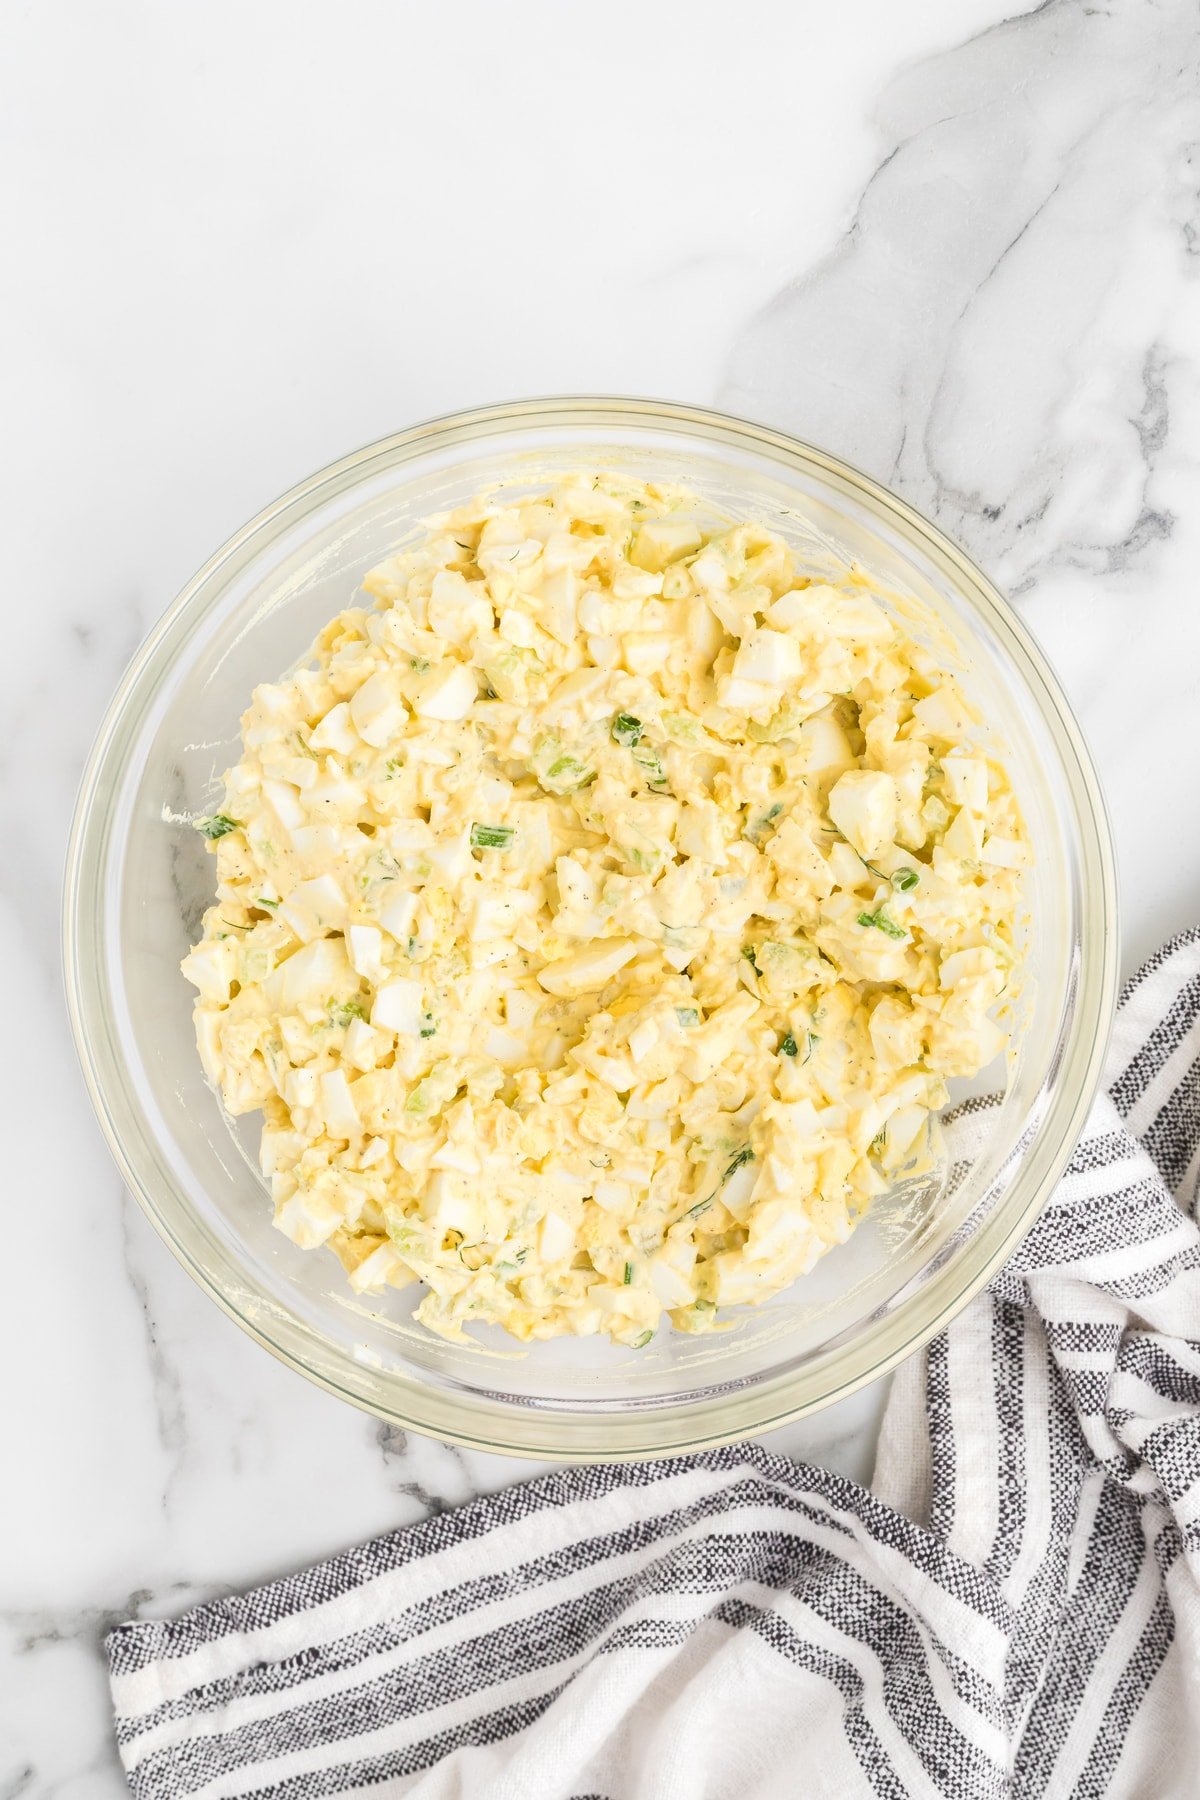 Egg salad mixture in a bowl